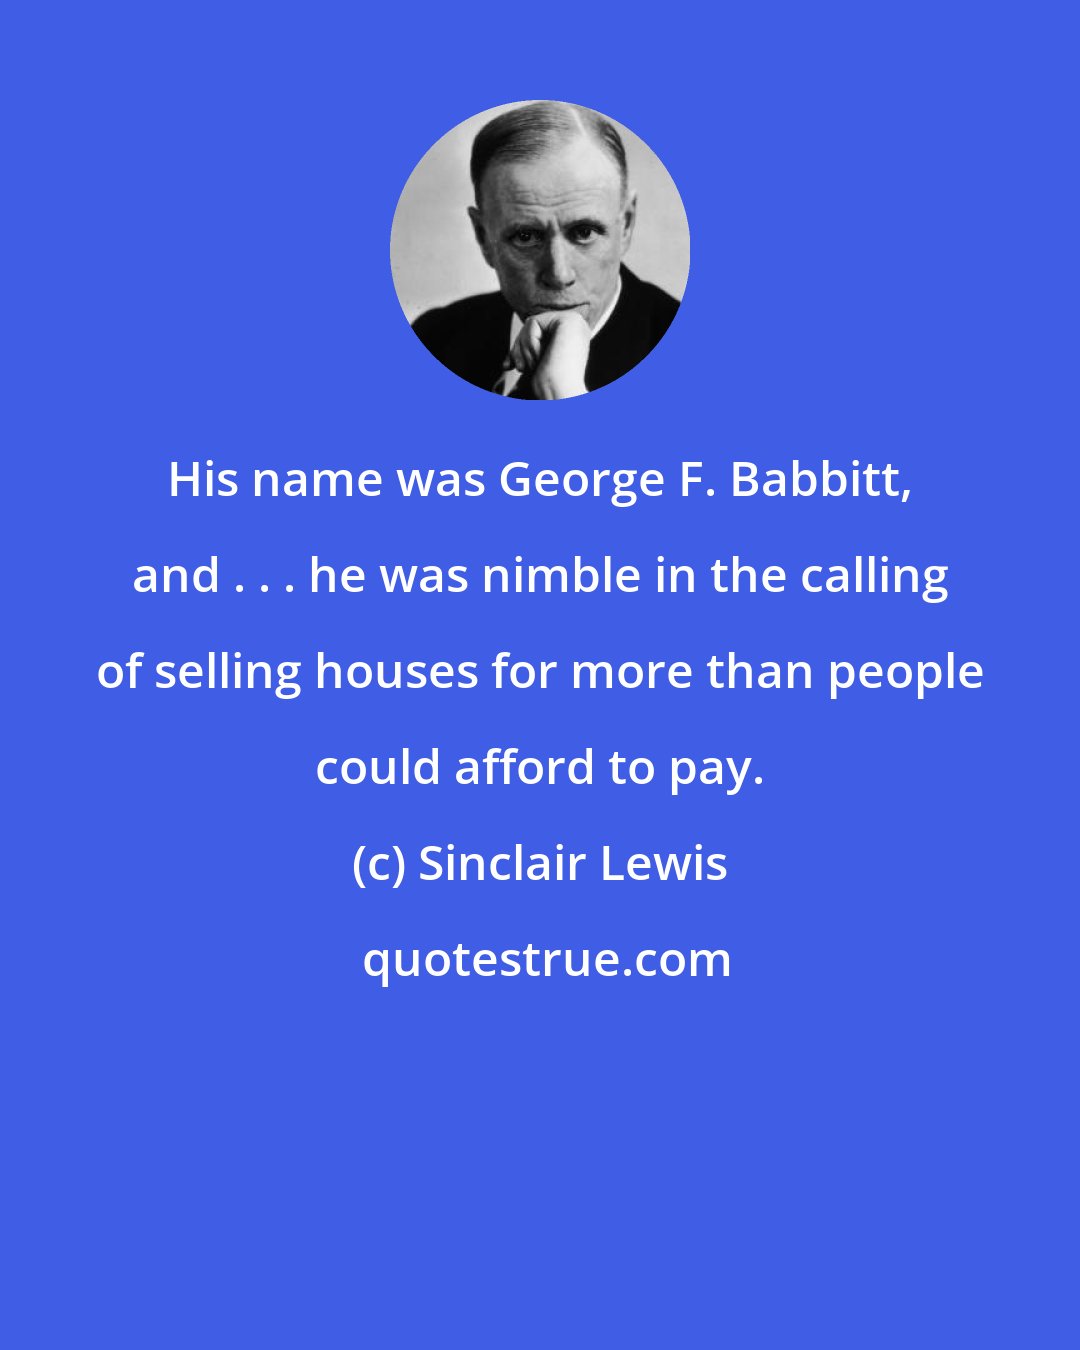 Sinclair Lewis: His name was George F. Babbitt, and . . . he was nimble in the calling of selling houses for more than people could afford to pay.